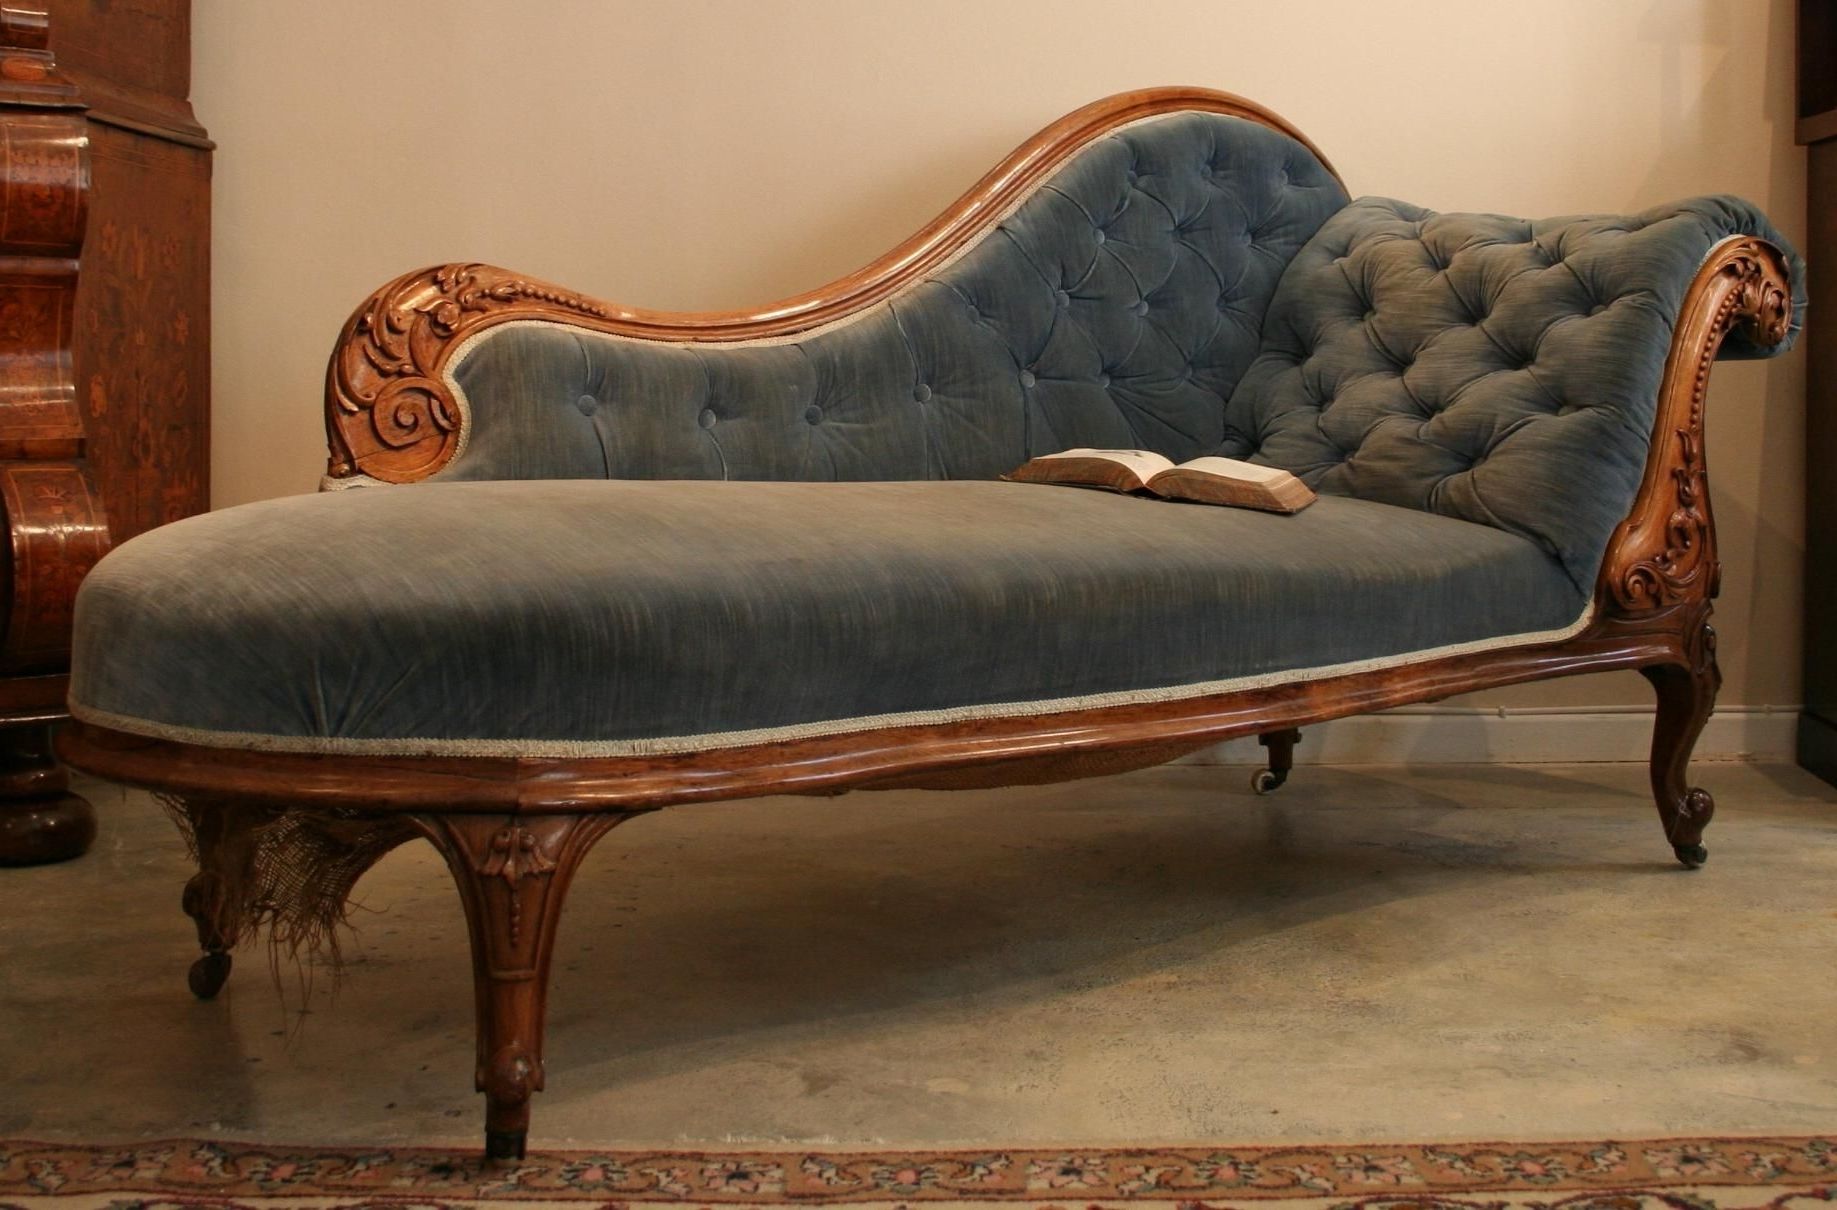 Chaise Lounges Google Images And Fainting Couch 1 